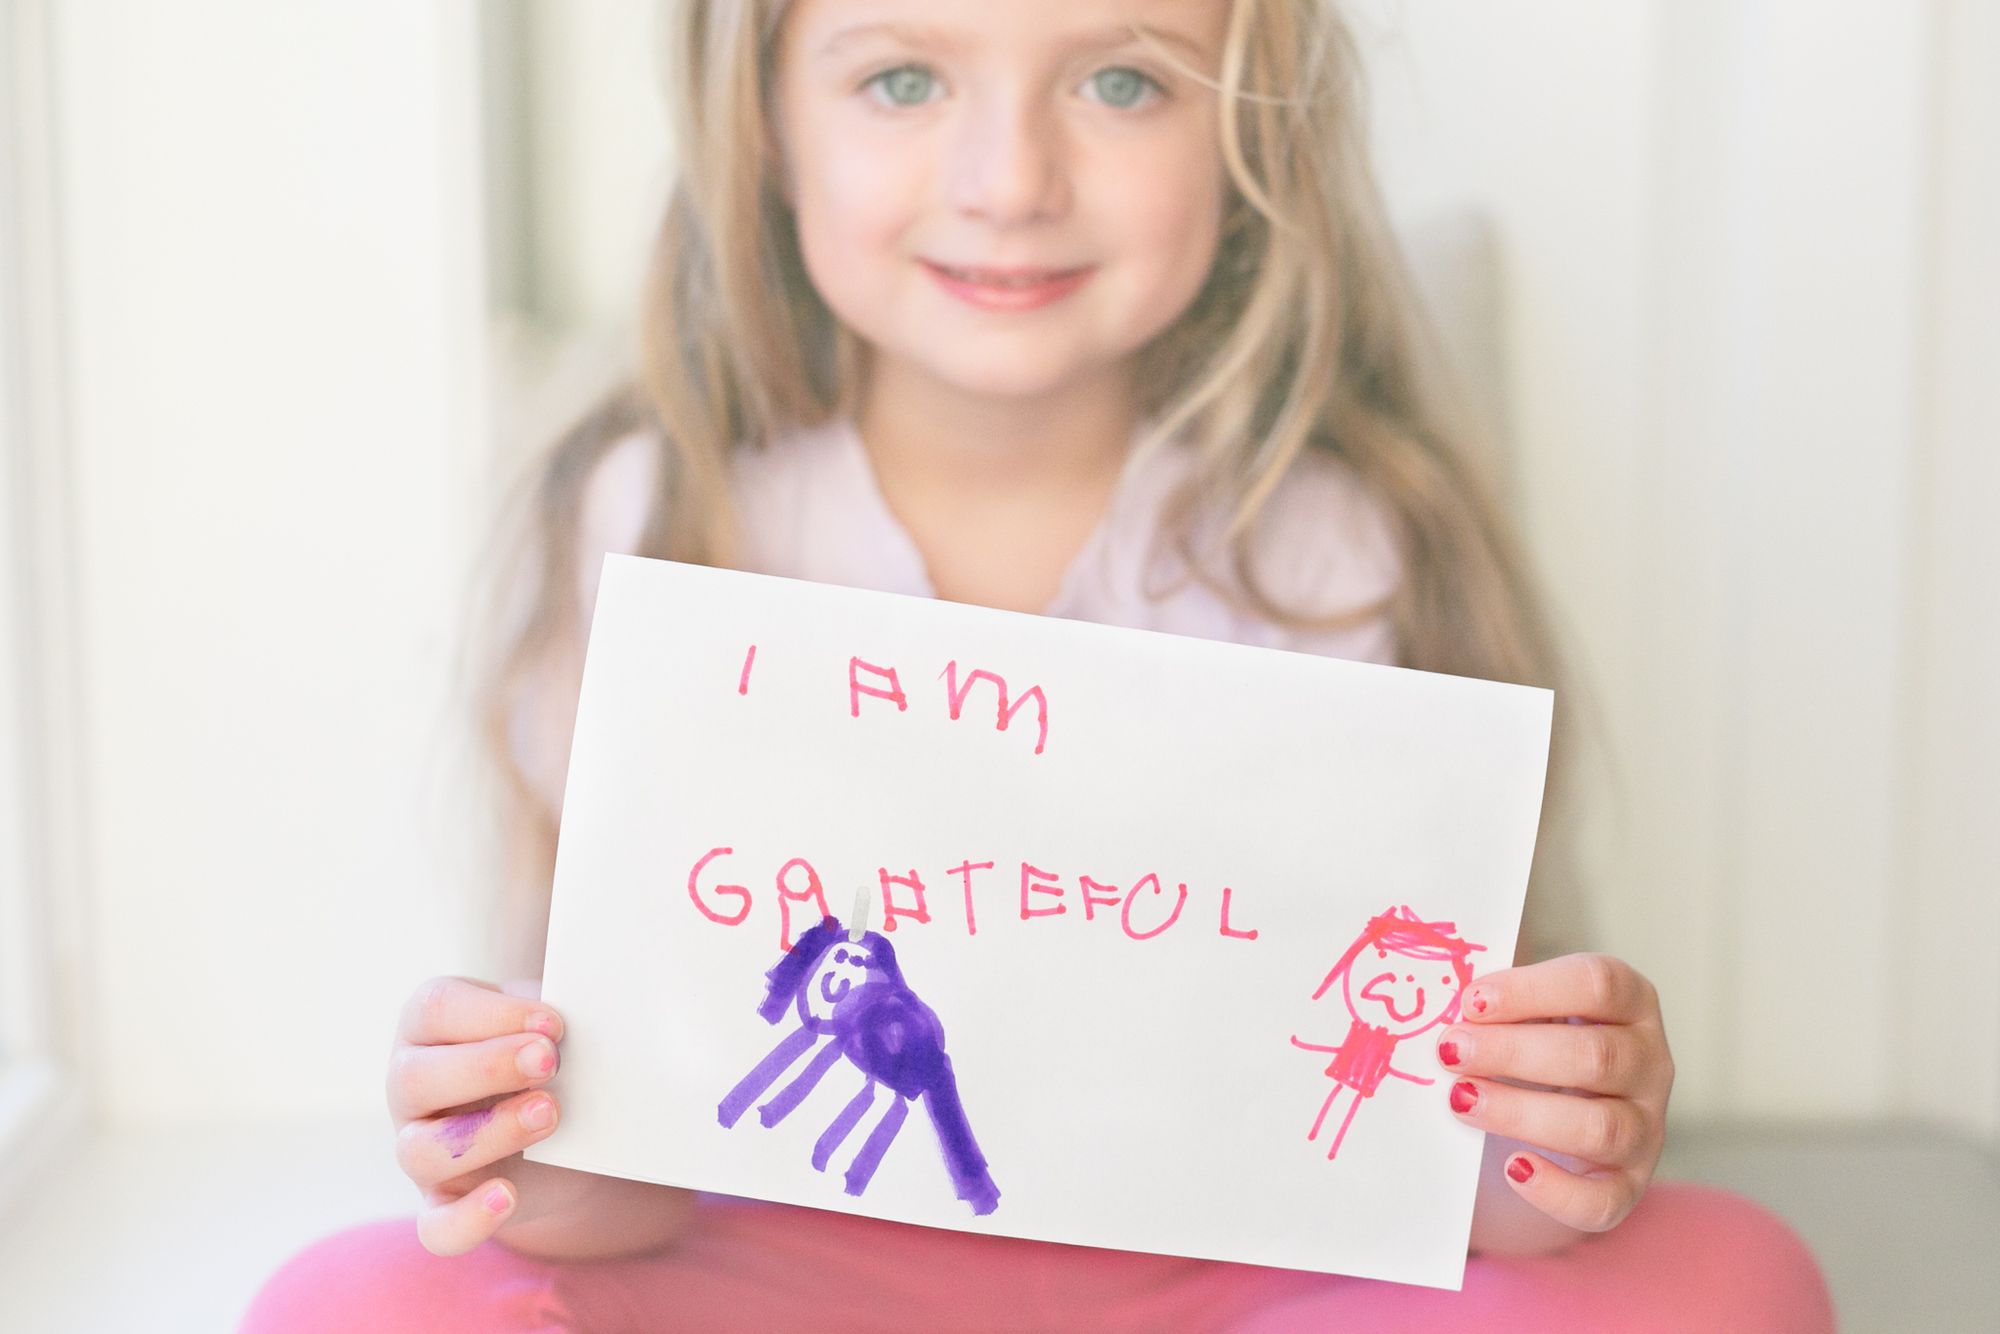 A young girl with blond hair and big blue eyes, the author's daughter, is holding up a hand-made thank you card with the words "I AM GRATEFUL" written in pink marker above a drawing of a purple unicorn and a smiling person.